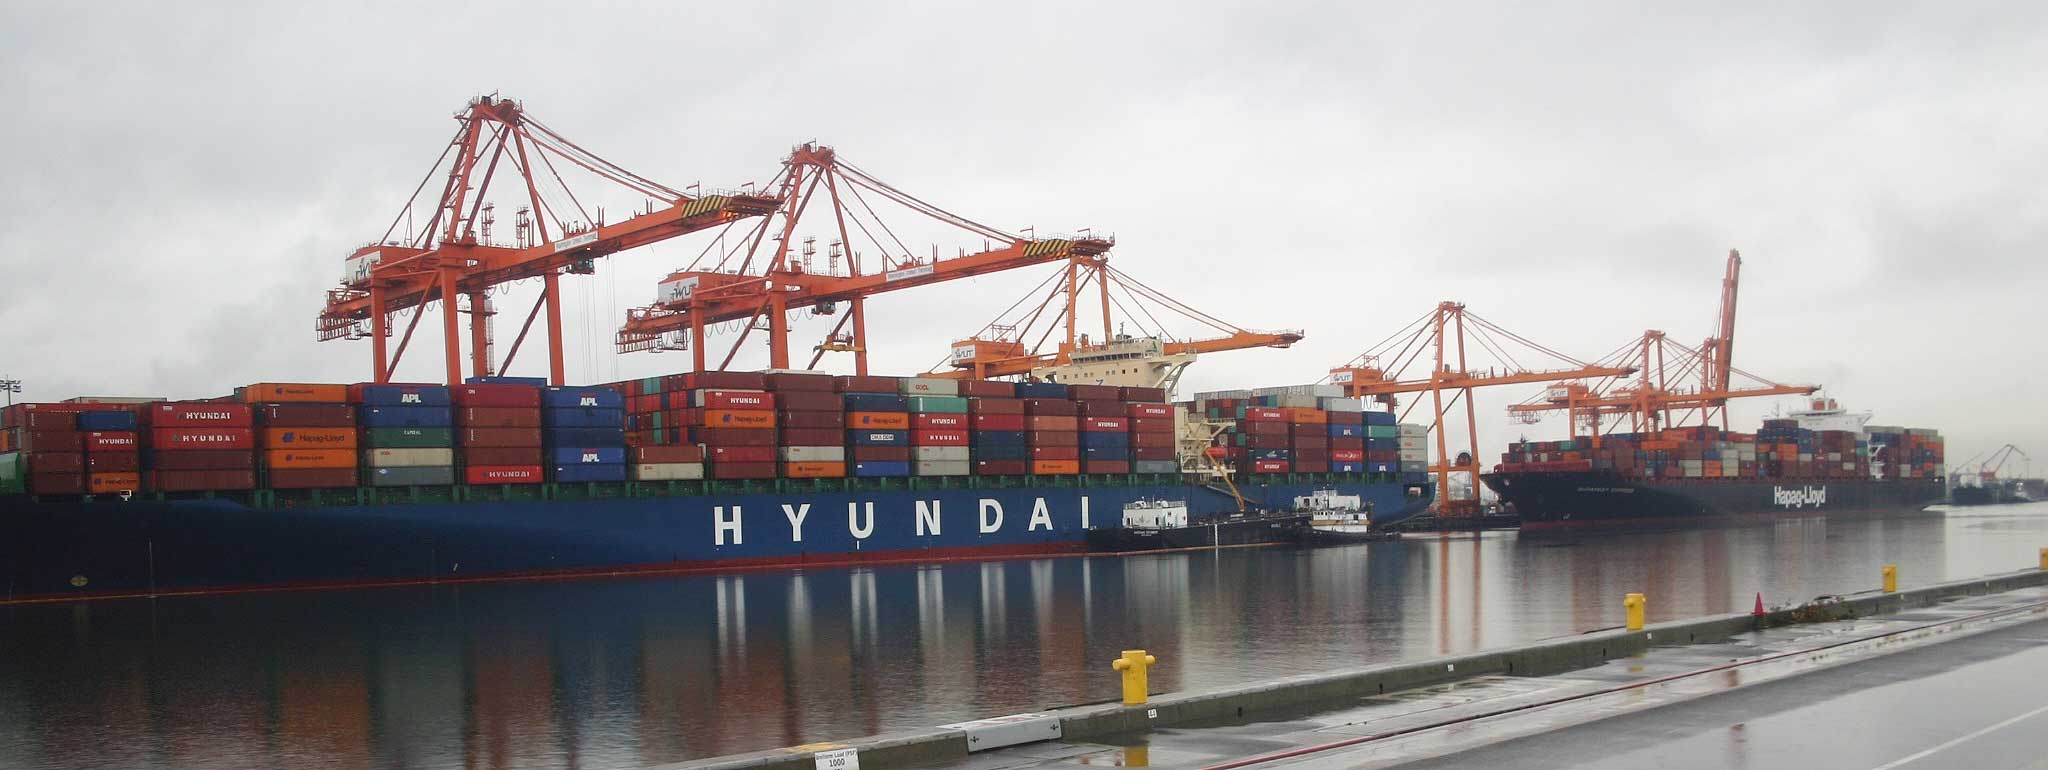 Transport briefs: Imports, exports at NW ports post strong October